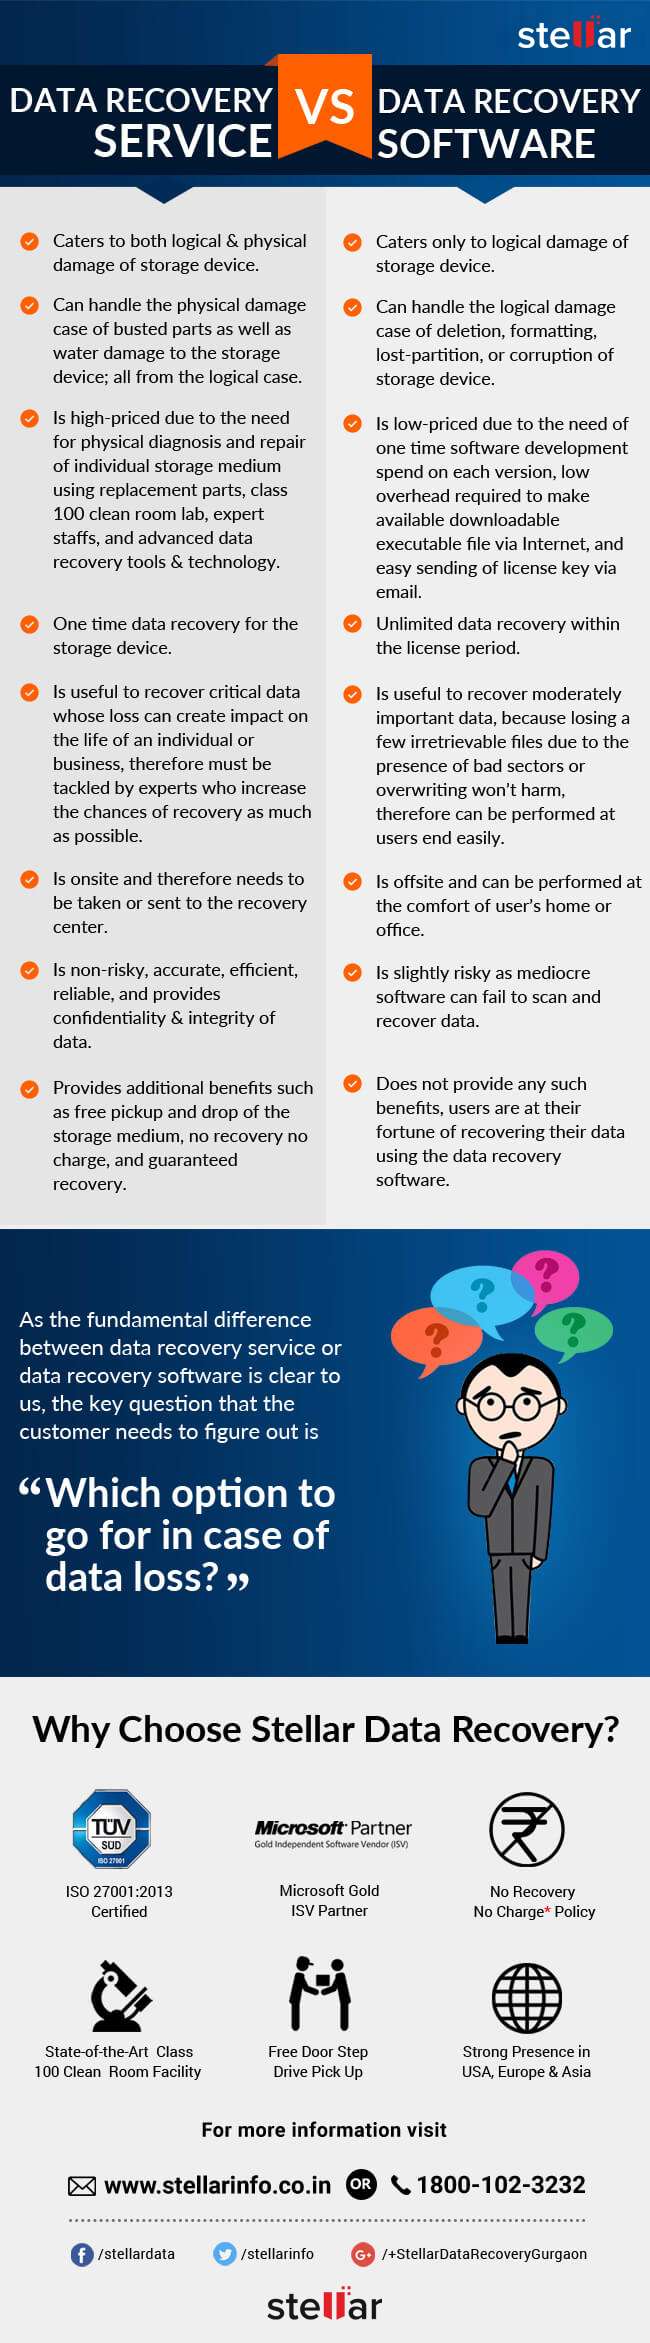 Data Recovery Service vs Data Recovery Software infographic